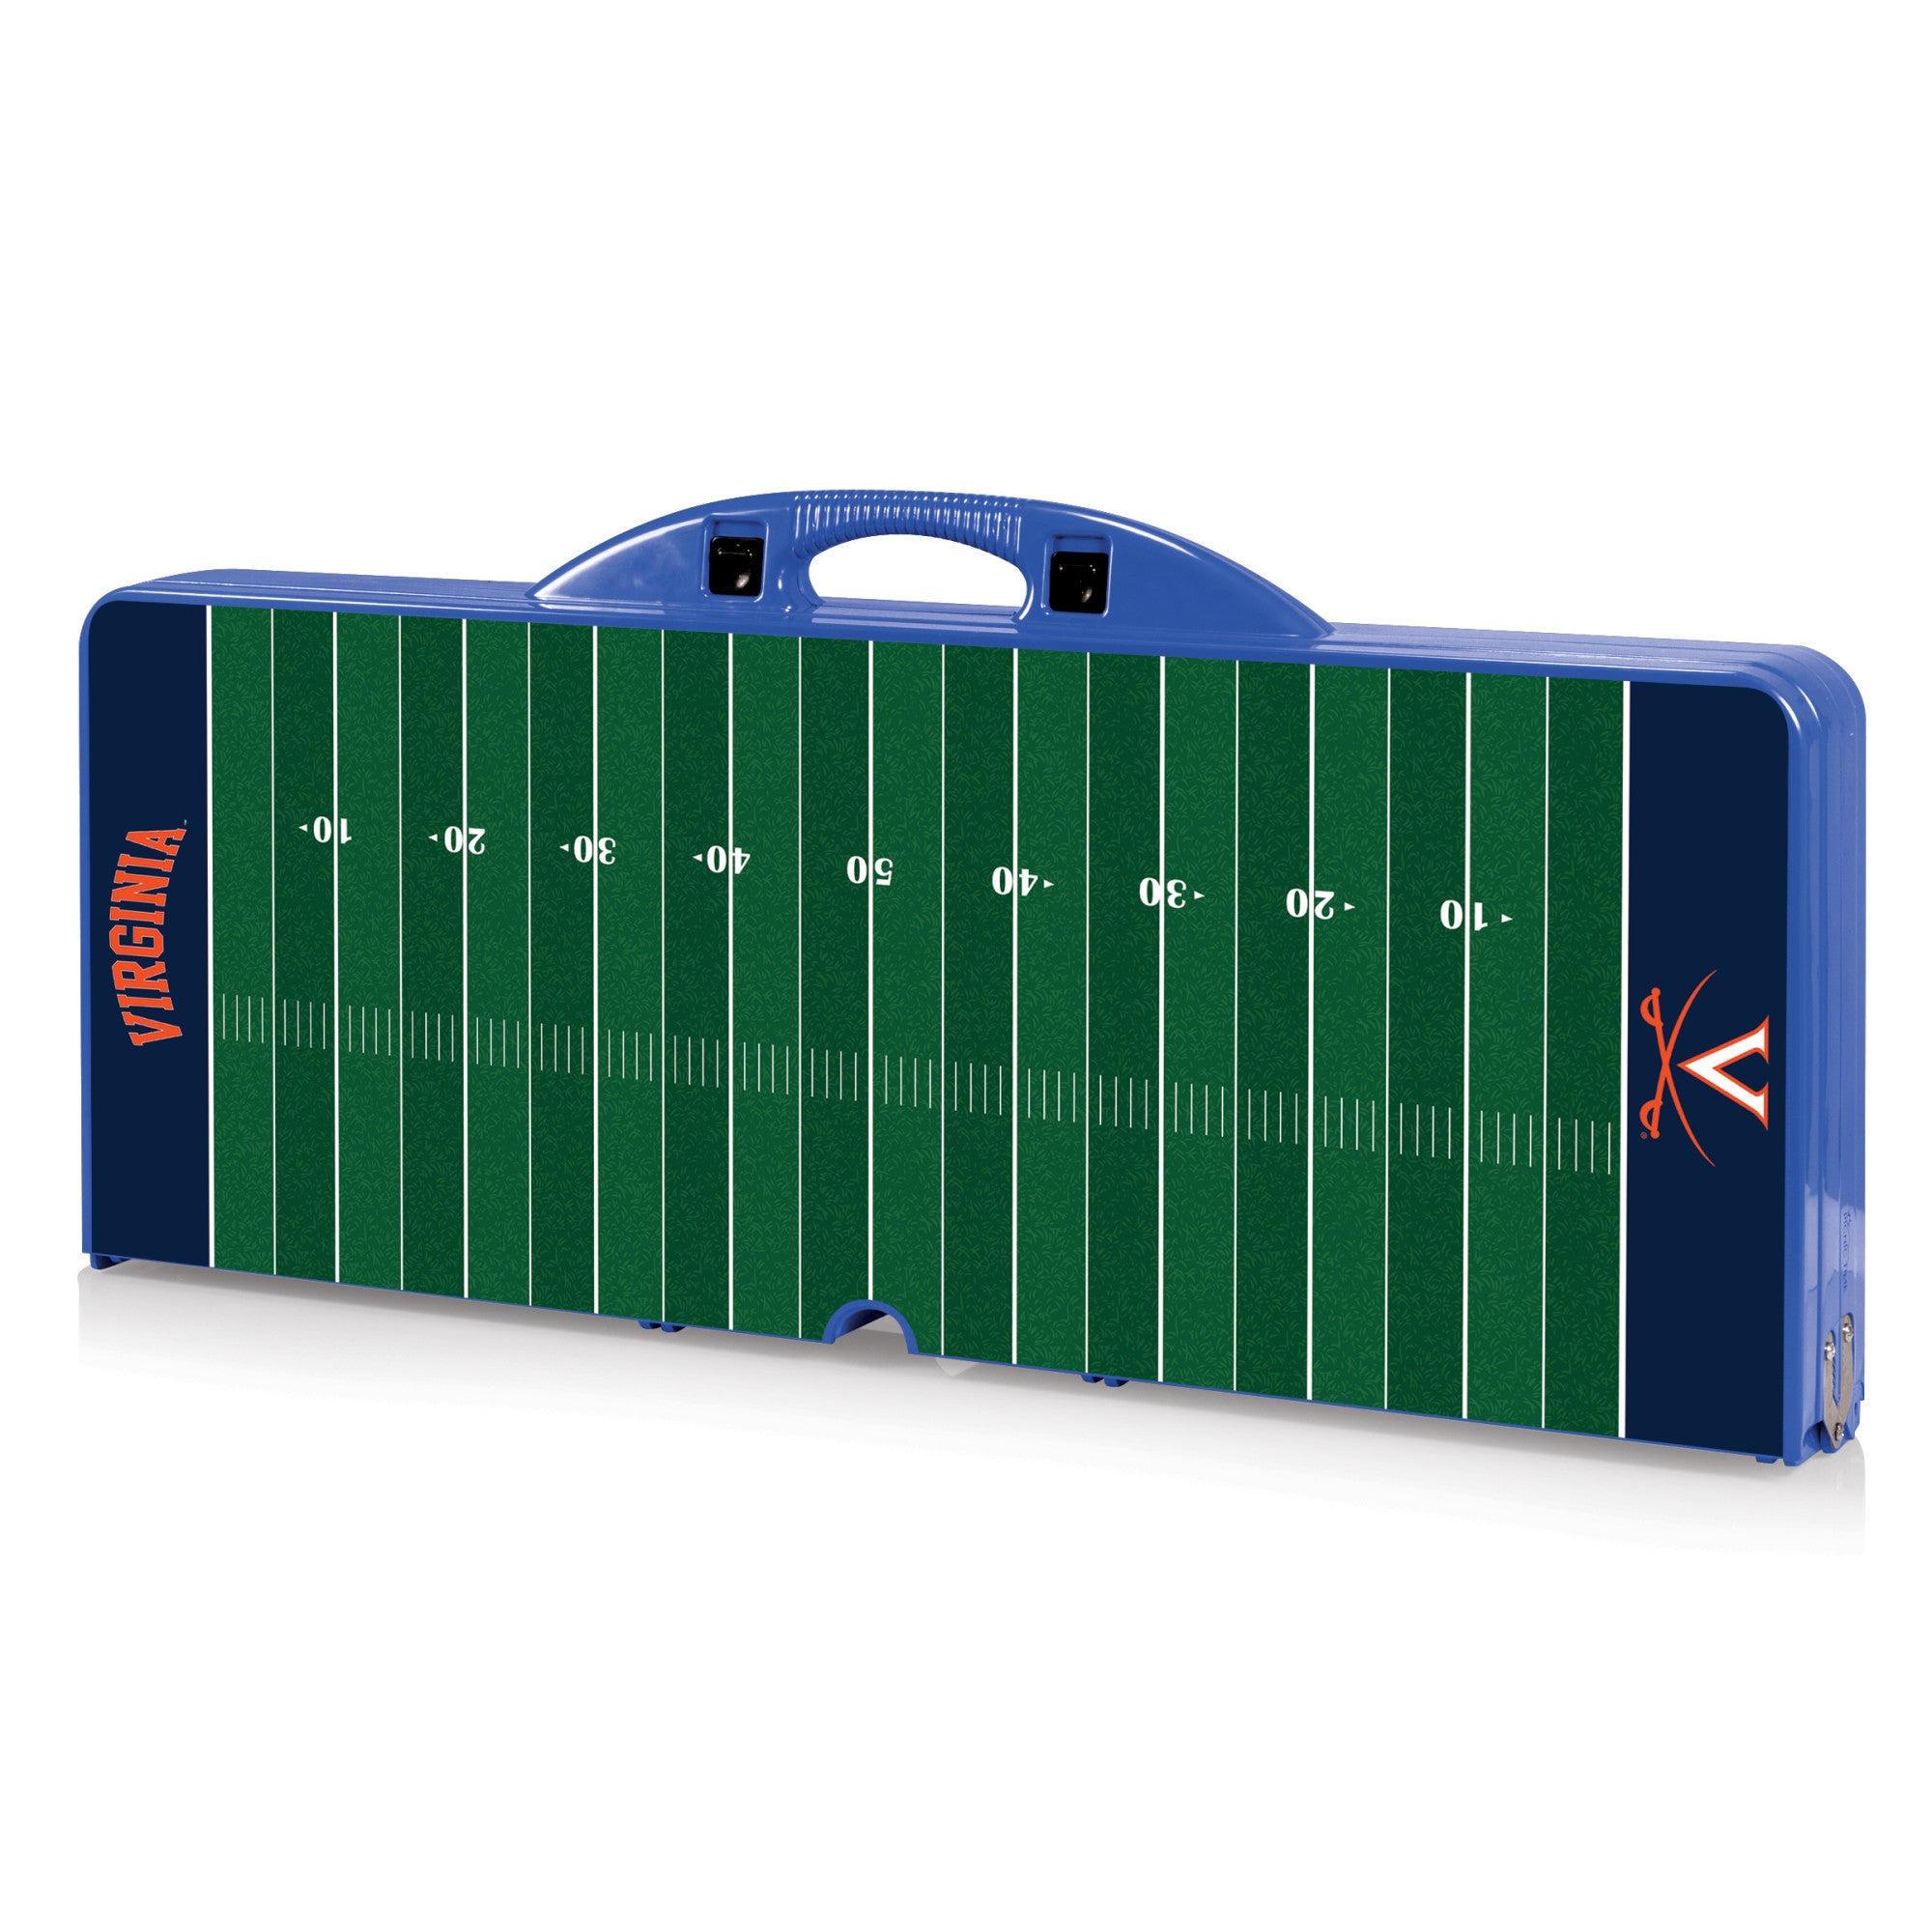 Football Field - Virginia Cavaliers - Picnic Table Portable Folding Table with Seats